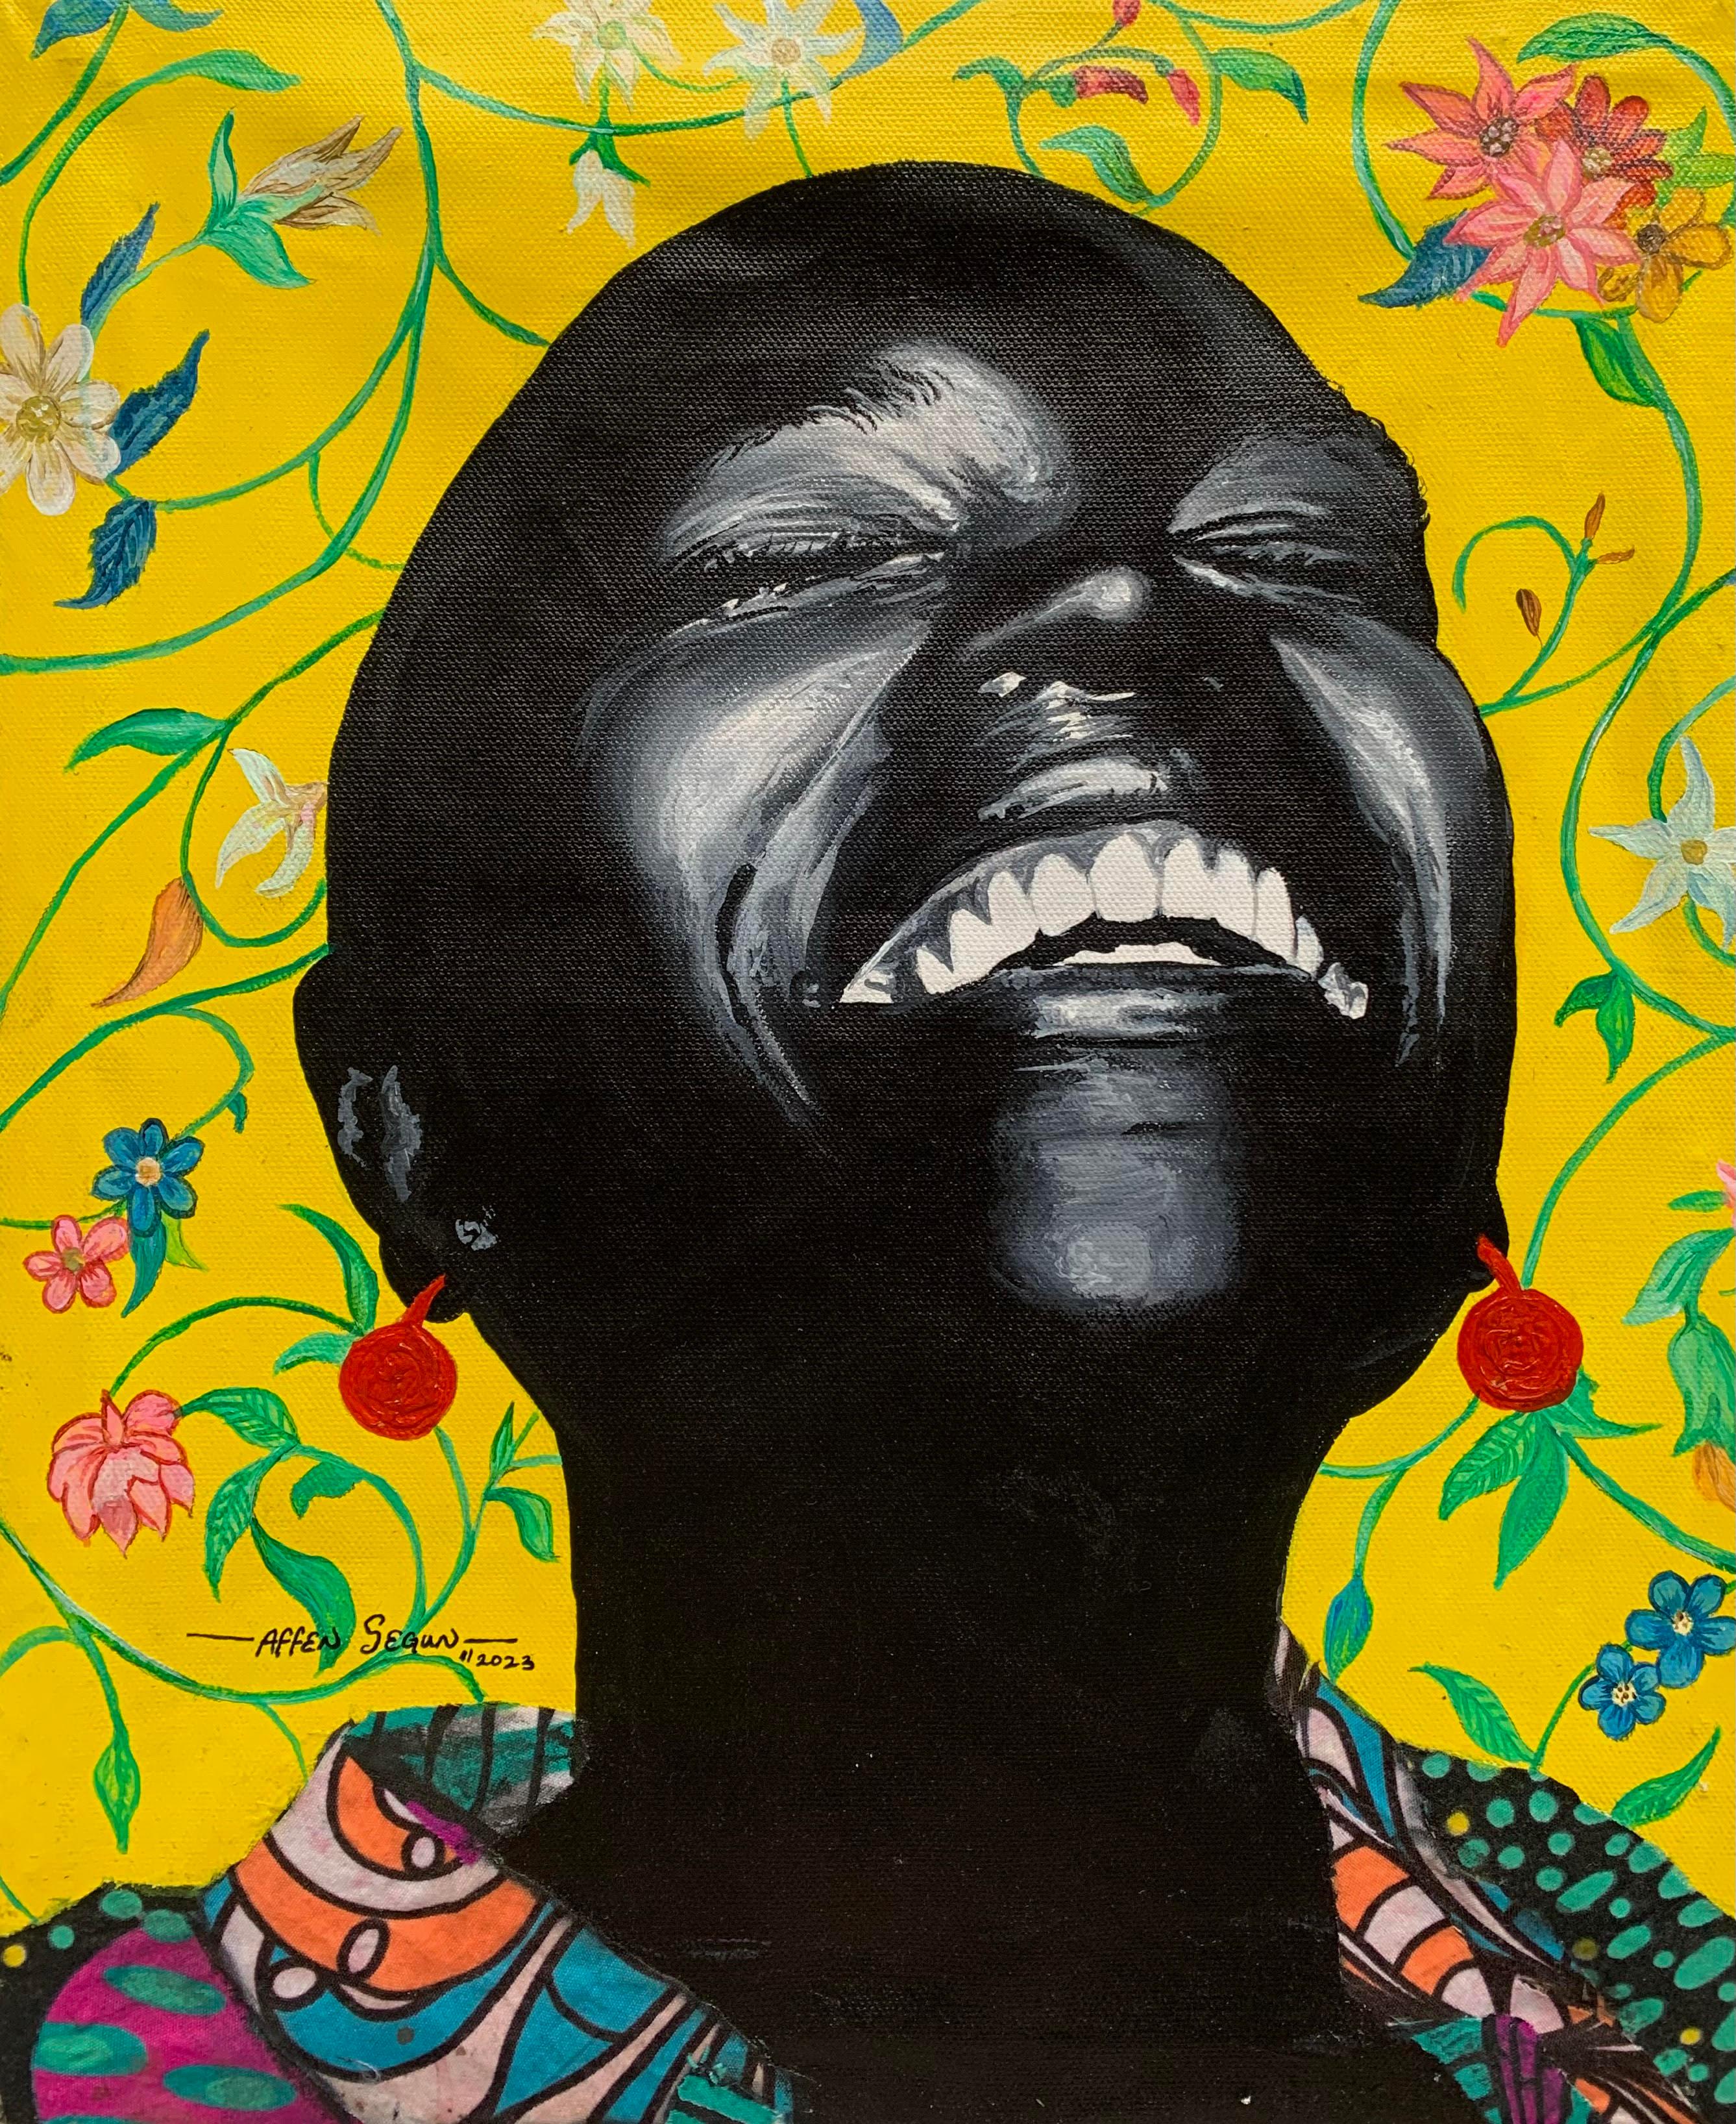 Affen Segun Figurative Painting - "Bloom from Within" Acrylic painting of a woman smiling over a floral background